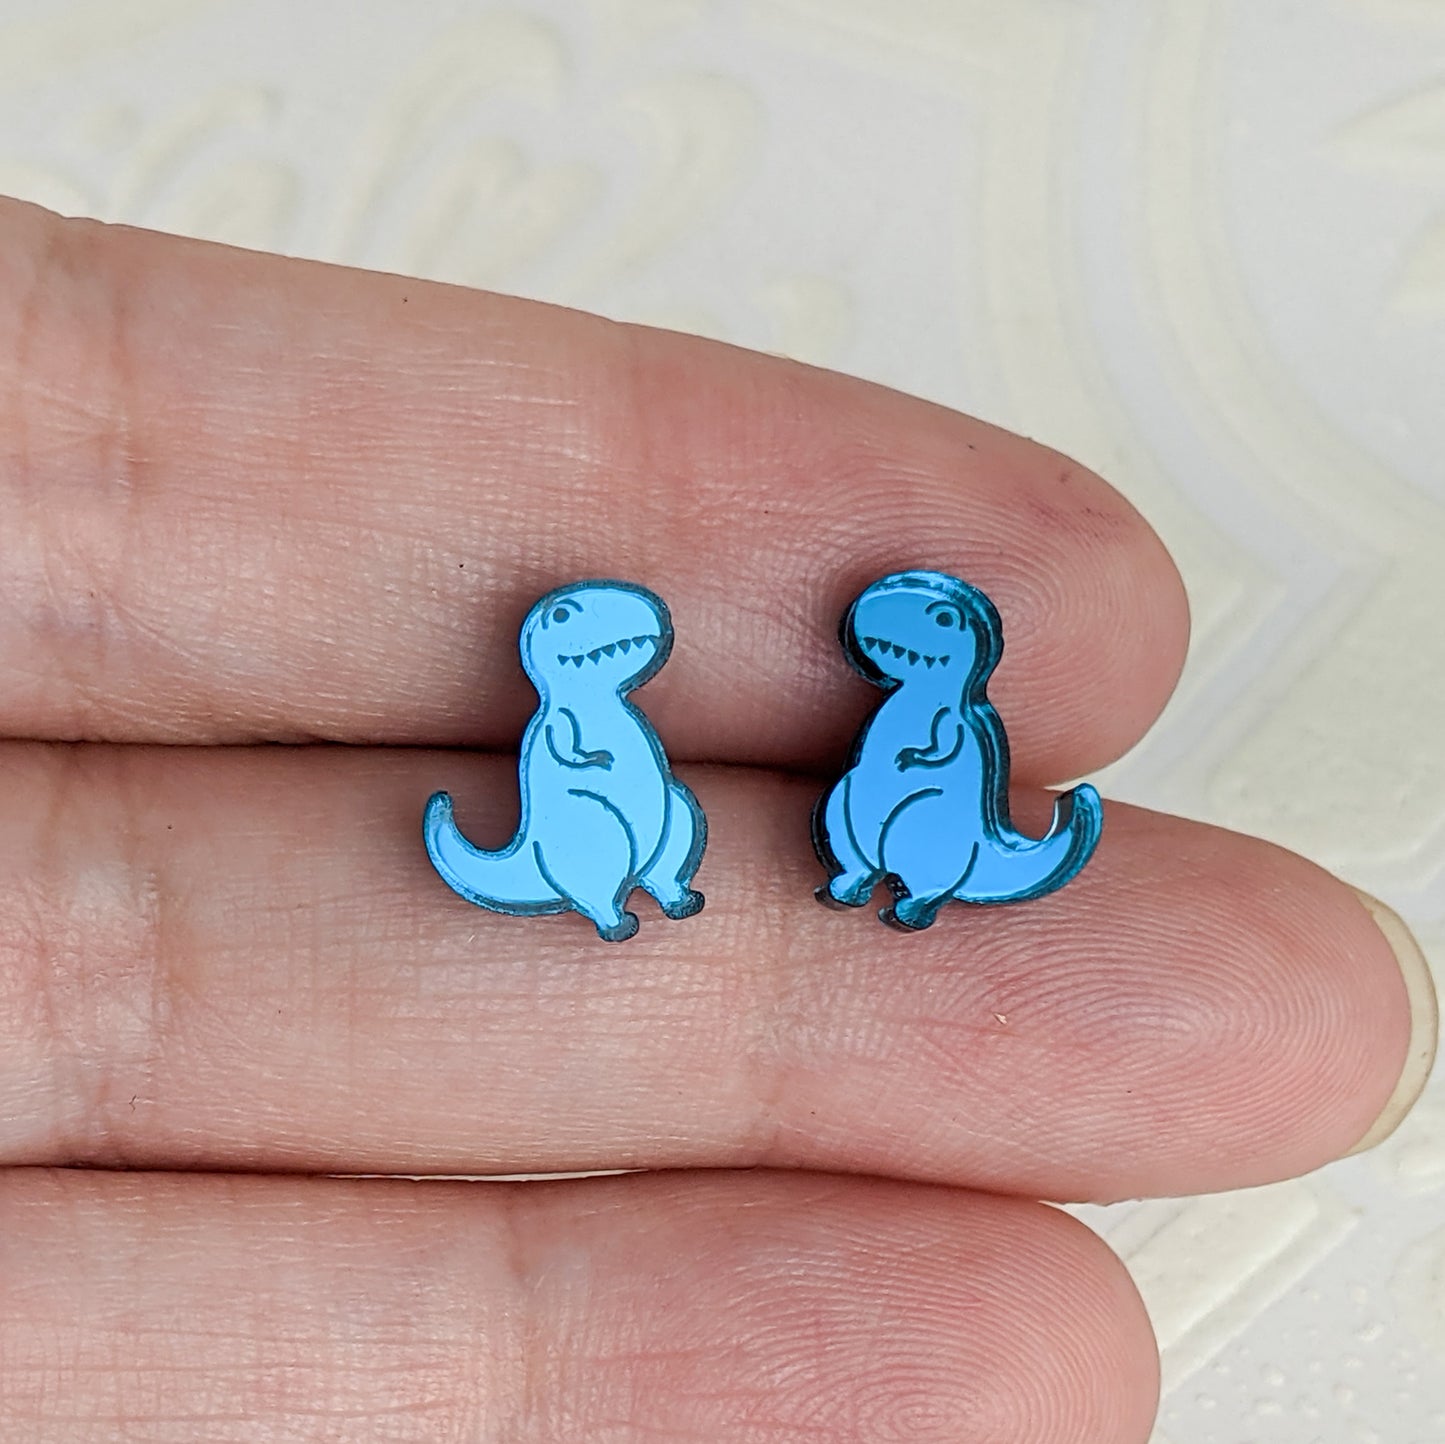 Cartoon Tyrannosaurus Rex stud earrings in teal mirrored acrylic.  The dinosaurs face towards each other and are being held between fingers on an open hand to show they are roughly the height of a finger.  By Isette.